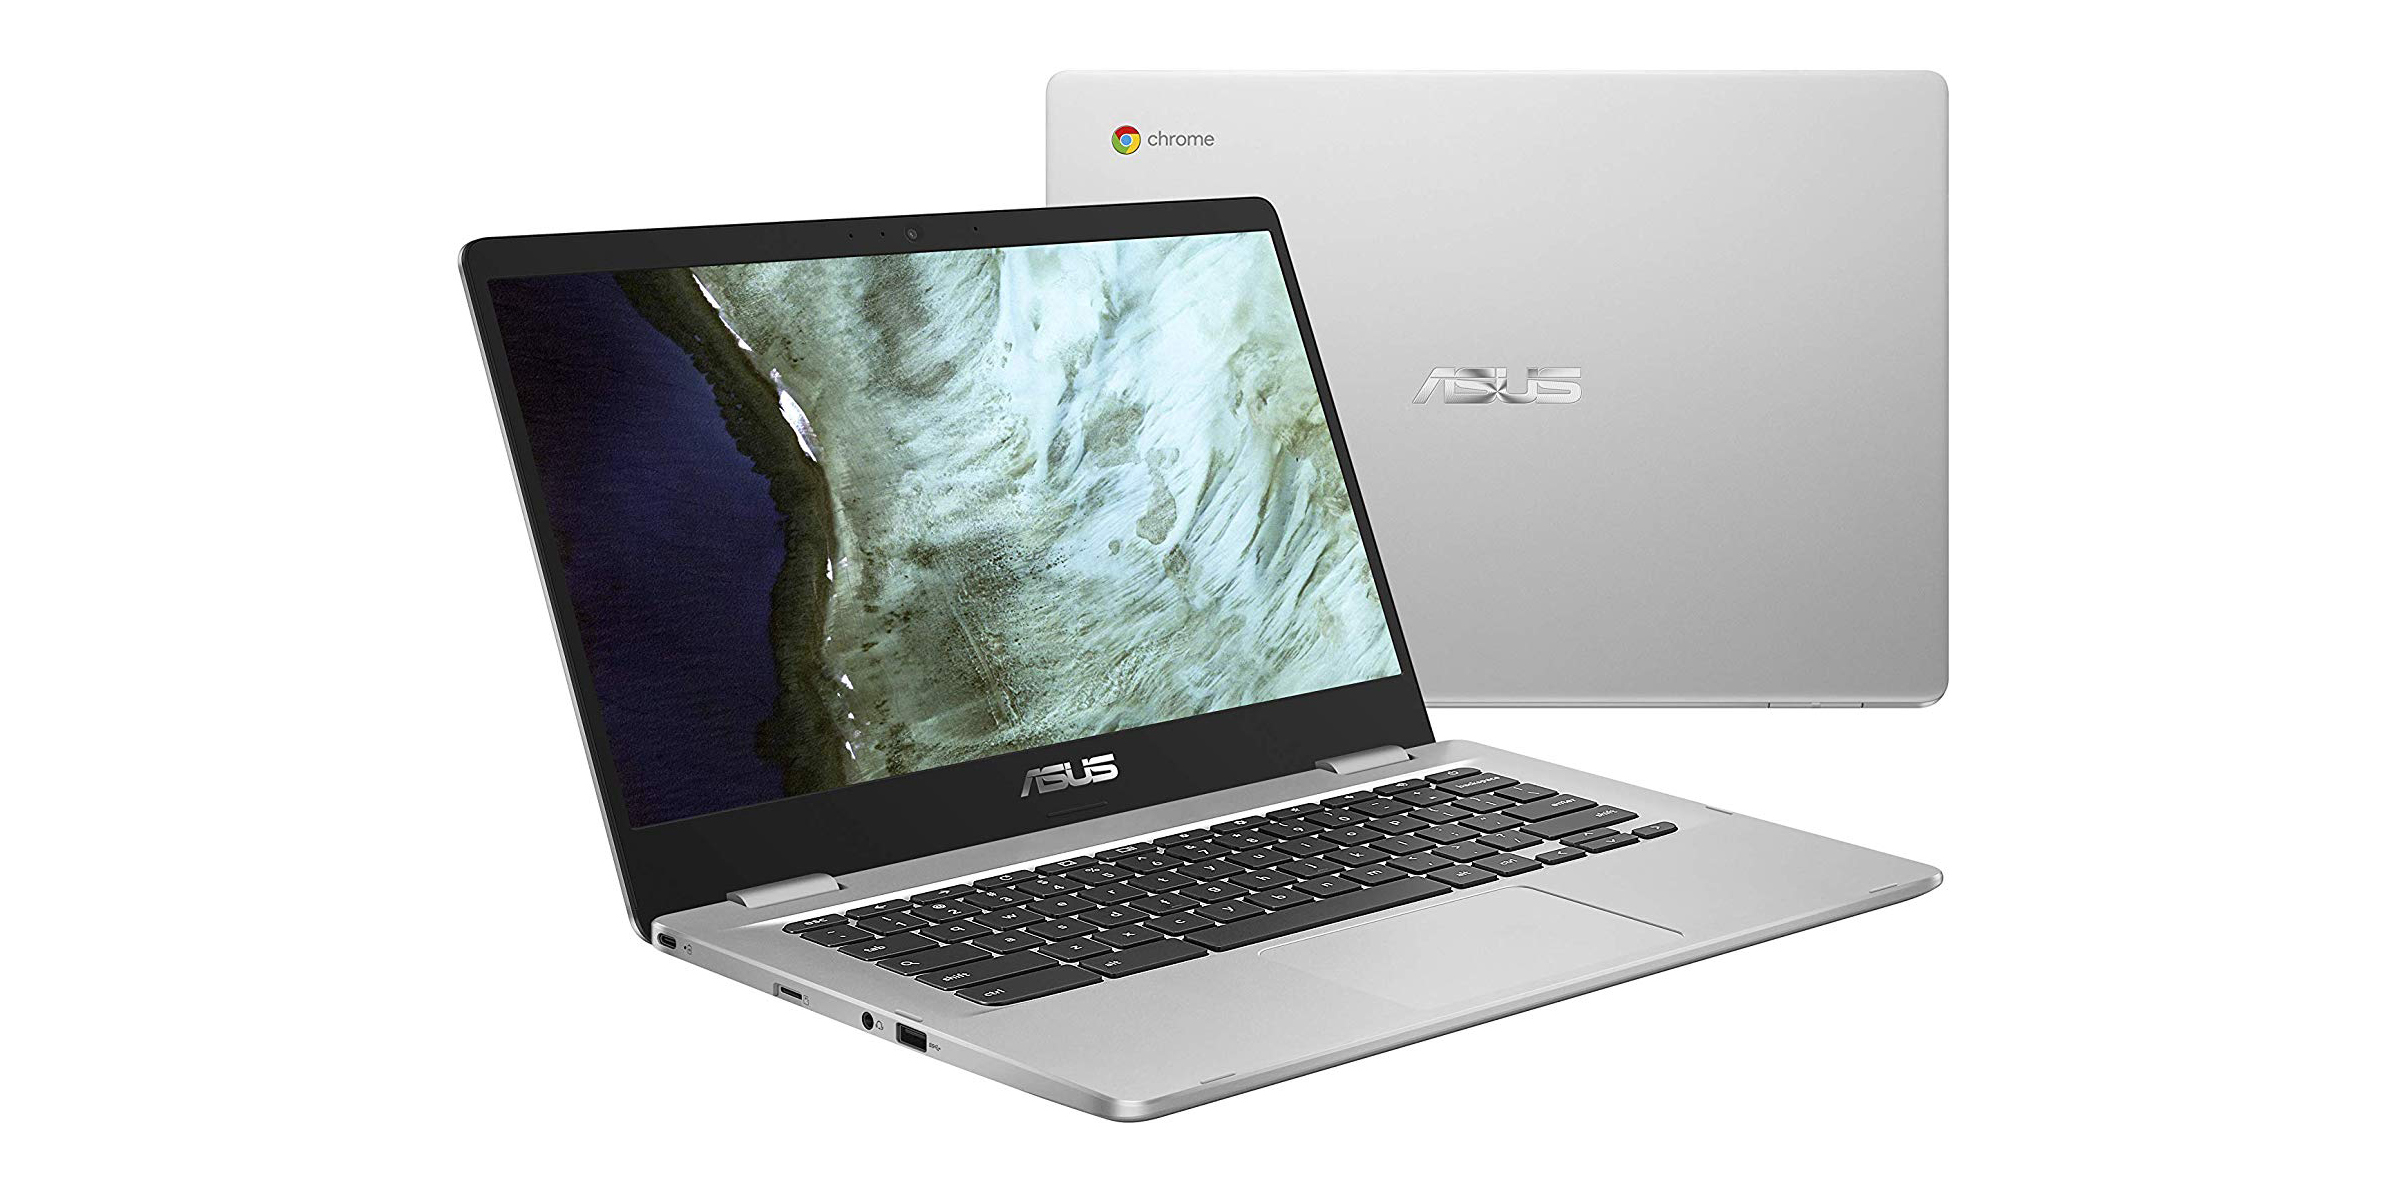 ASUS 14-inch Chromebook sports USB-C, 64GB of storage, more for $199